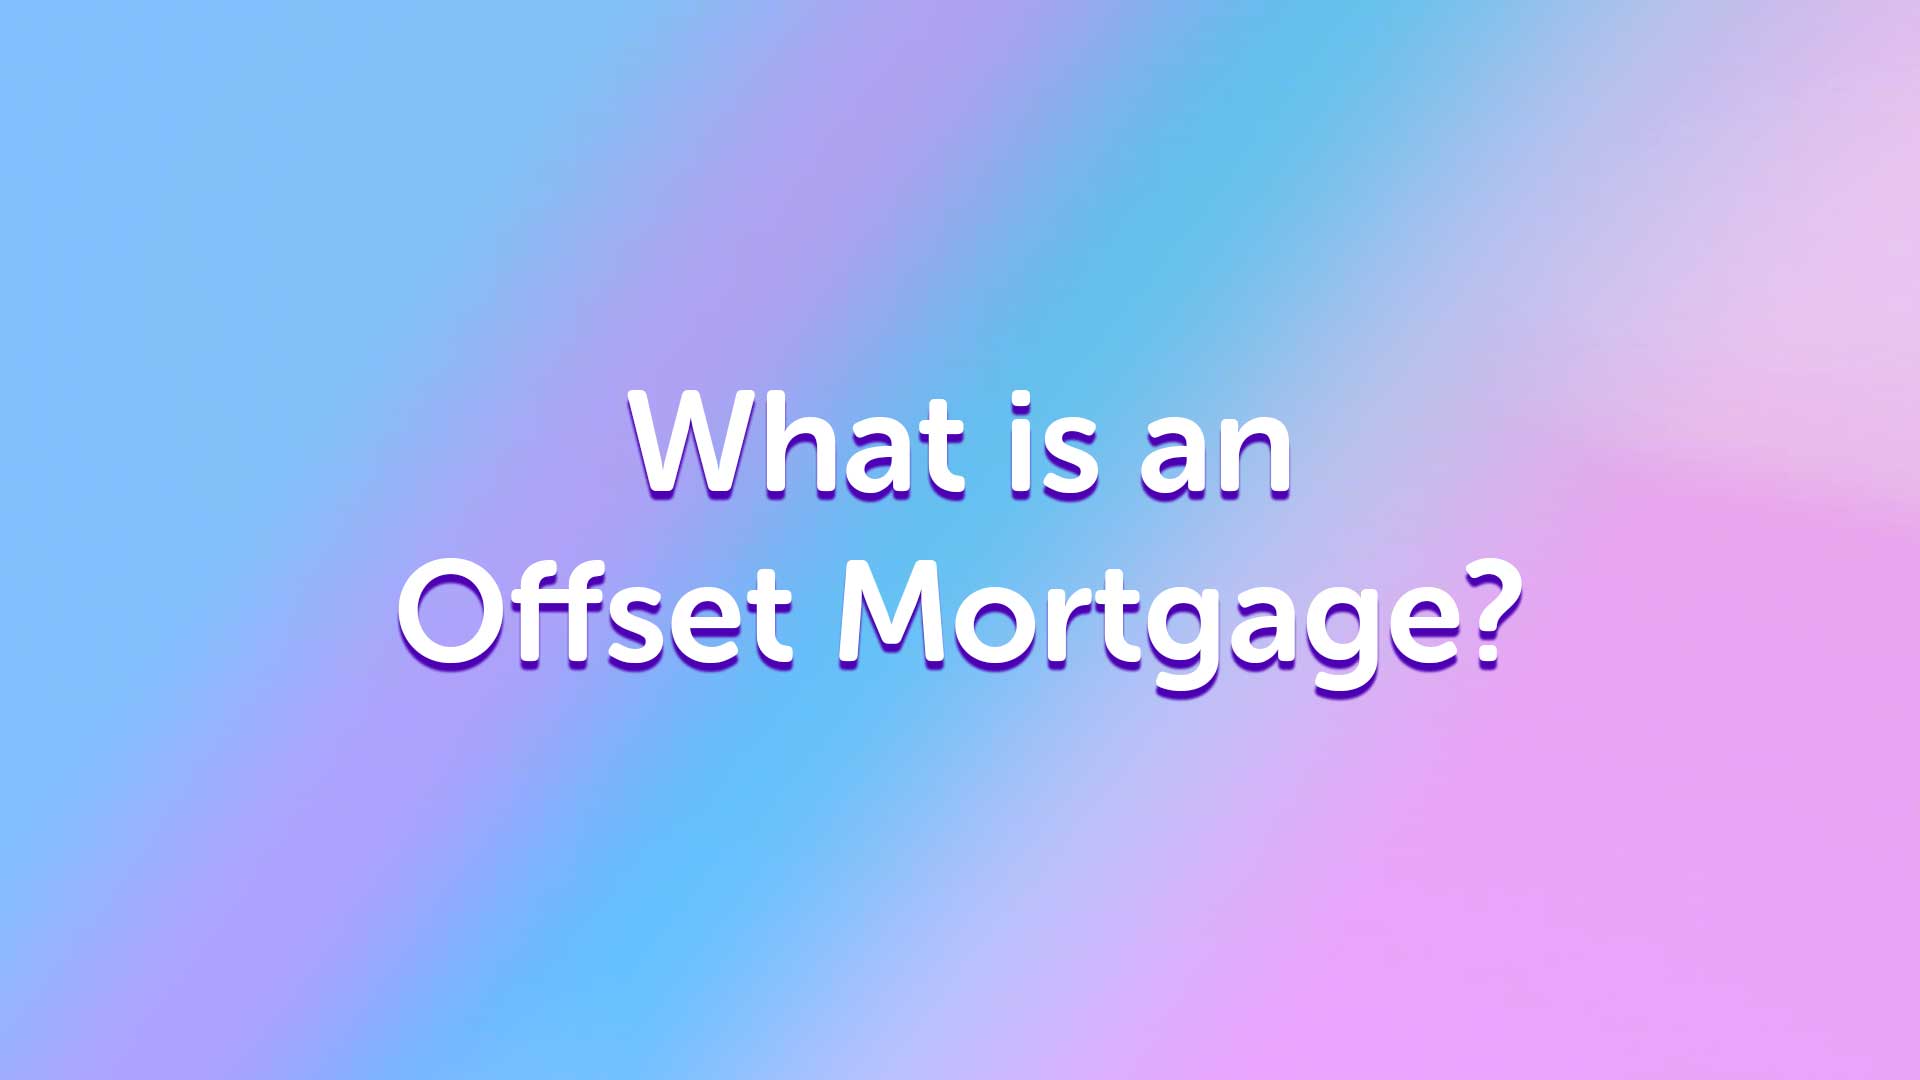 Offset Mortgage Advice in Liverpool | Liverpoolmoneyman